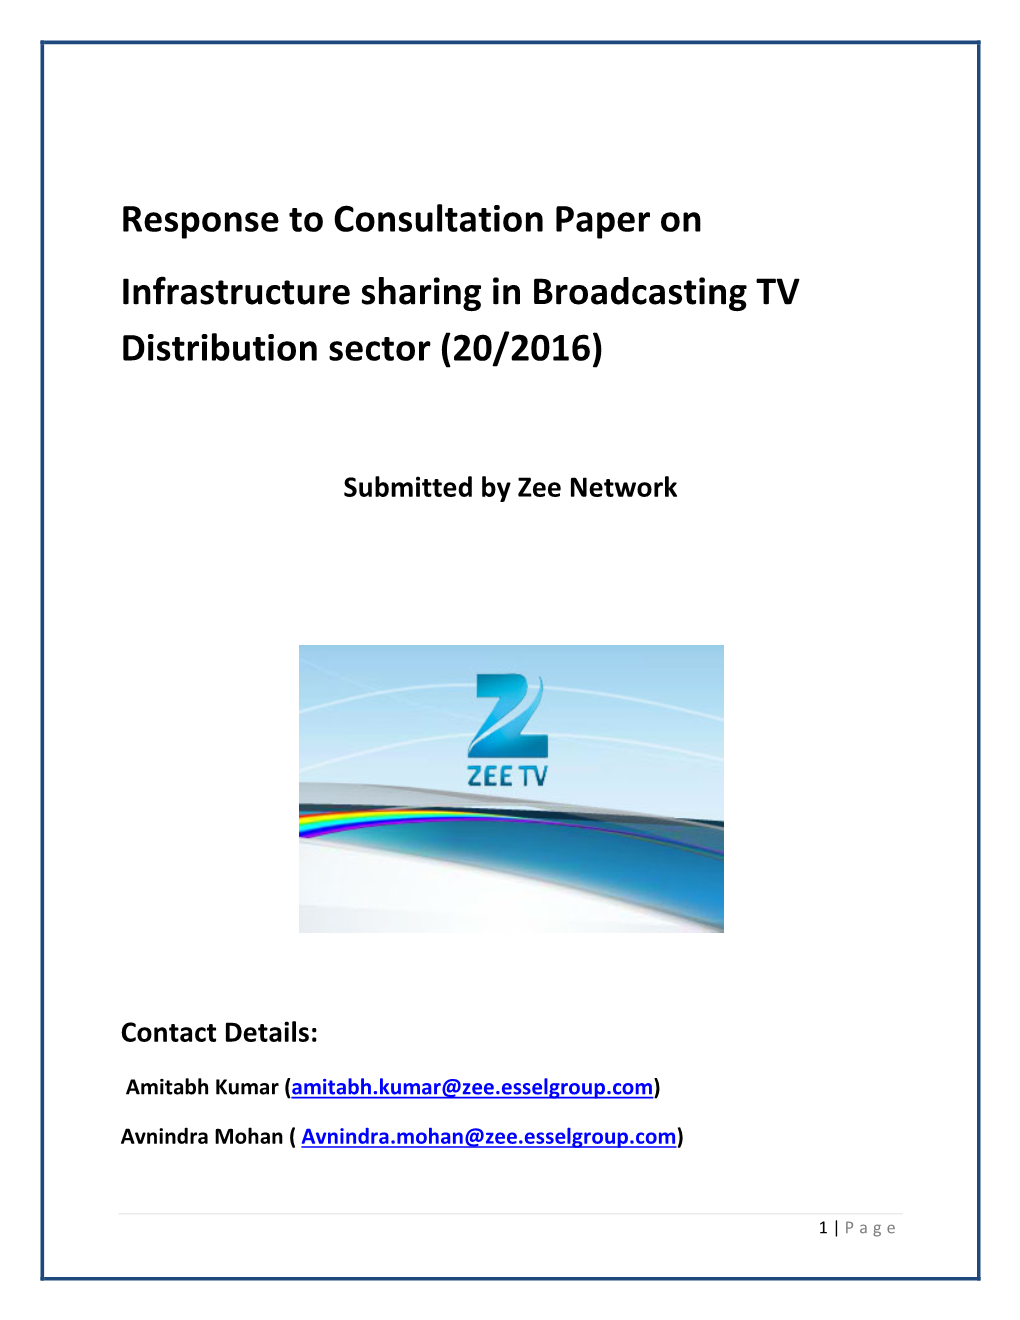 Response to Consultation Paper on Infrastructure Sharing in Broadcasting TV Distribution Sector (20/2016)